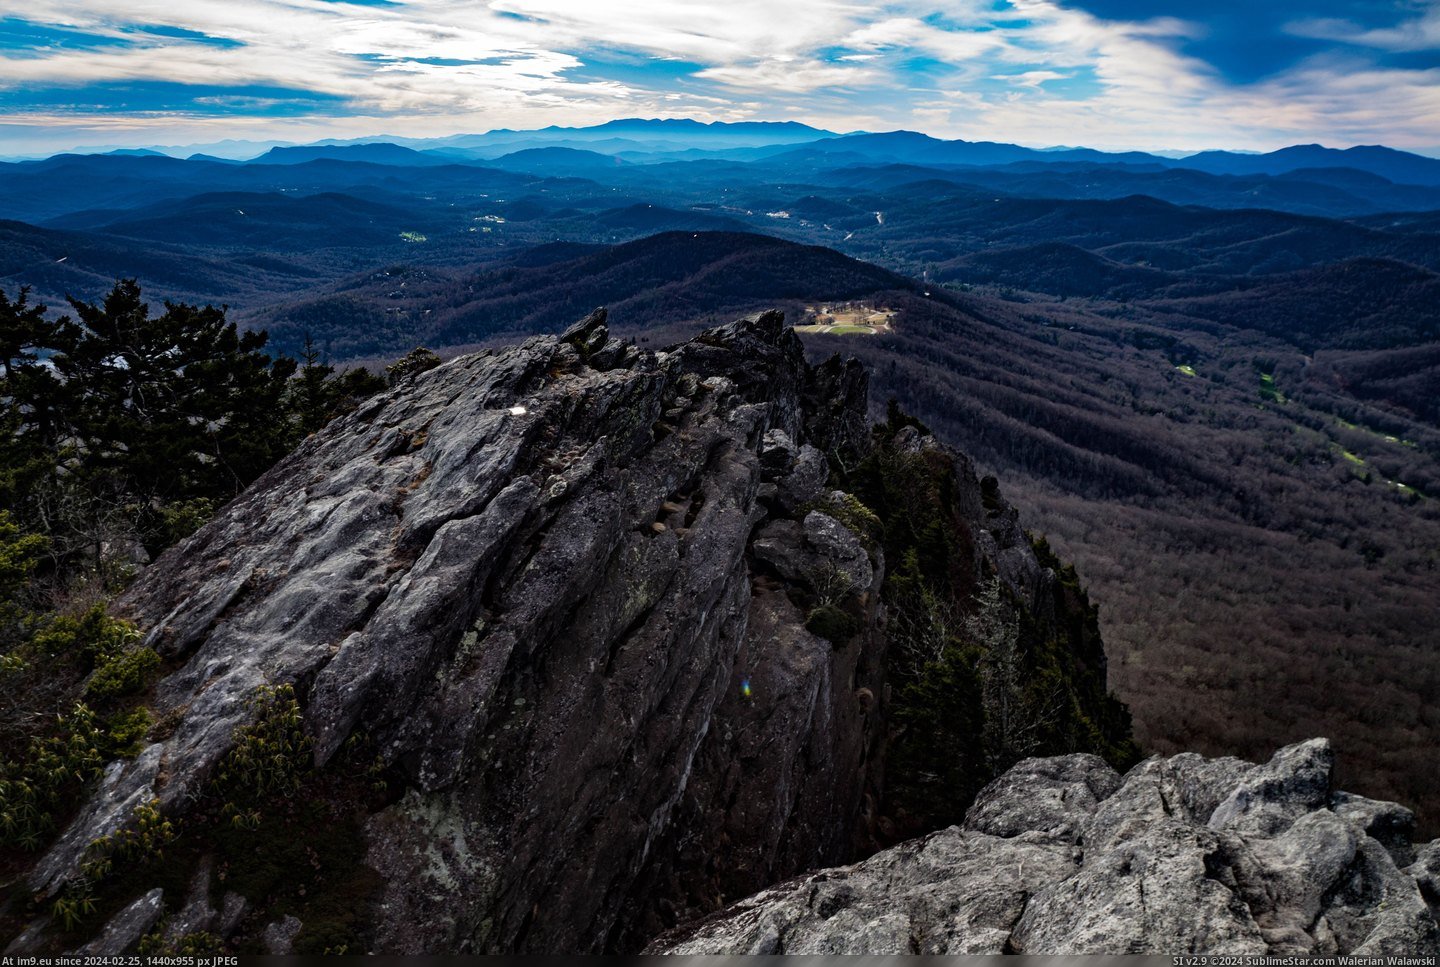 #Black #Mitchell #Usa #Grandfather #Peak #Mountains #Mountain [Earthporn] Linville Peak, Grandfather Mountain, NC, USA: looking towards Mt. Mitchell and the Black Mountains[5456x3642] Pic. (Image of album My r/EARTHPORN favs))